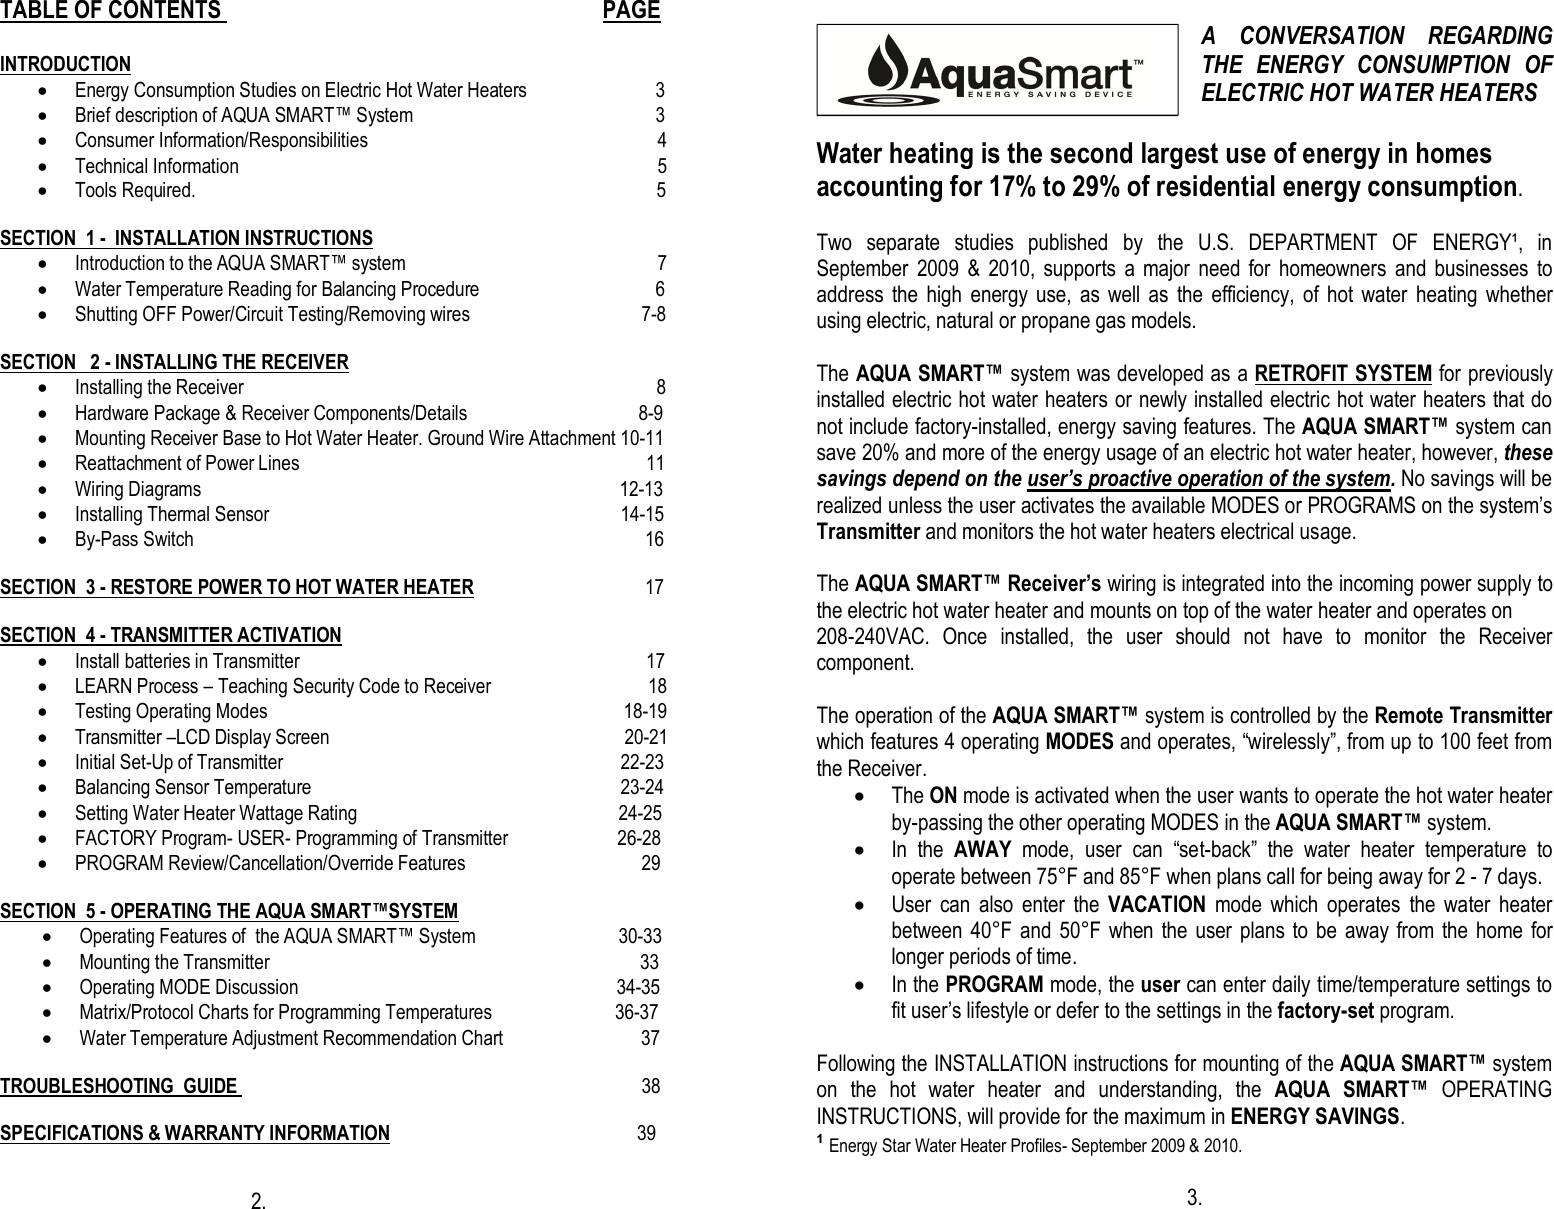 TABLE OF CONTENTS                                                                   PAGE   INTRODUCTION · Energy Consumption Studies on Electric Hot Water Heaters                           3 · Brief description of AQUA SMART™ System                                                   3 · Consumer Information/Responsibilities                                                             4 · Technical Information                       5   · Tools Required.                                                                                                 5                                                                                      SECTION  1 -  INSTALLATION INSTRUCTIONS · Introduction to the AQUA SMART™ system                                                     7  · Water Temperature Reading for Balancing Procedure                                     6                                       · Shutting OFF Power/Circuit Testing/Removing wires                                    7-8                                                 SECTION   2 - INSTALLING THE RECEIVER · Installing the Receiver                                                                                       8 · Hardware Package &amp; Receiver Components/Details                                    8-9 · Mounting Receiver Base to Hot Water Heater. Ground Wire Attachment 10-11                                              · Reattachment of Power Lines                                                                         11 · Wiring Diagrams                                                                                        12-13                                                                                             · Installing Thermal Sensor                                                                          14-15 · By-Pass Switch                                                                                               16                                                                                                                                                                                                                                                   SECTION  3 - RESTORE POWER TO HOT WATER HEATER                                    17                                                                                                                                         SECTION  4 - TRANSMITTER ACTIVATION                                                               · Install batteries in Transmitter                                                                         17 · LEARN Process – Teaching Security Code to Receiver                                 18 · Testing Operating Modes                                                                           18-19                                                                                                              · Transmitter –LCD Display Screen                                                              20-21 · Initial Set-Up of Transmitter                                                                       22-23 · Balancing Sensor Temperature                                                                 23-24 · Setting Water Heater Wattage Rating                                                       24-25 · FACTORY Program- USER- Programming of Transmitter                       26-28 · PROGRAM Review/Cancellation/Override Features                                     29  SECTION  5 - OPERATING THE AQUA SMART™SYSTEM · Operating Features of  the AQUA SMART™ System                              30-33 · Mounting the Transmitter                                                                              33 · Operating MODE Discussion                                                                   34-35 · Matrix/Protocol Charts for Programming Temperatures                          36-37 · Water Temperature Adjustment Recommendation Chart                             37  TROUBLESHOOTING  GUIDE                                                                                     38  SPECIFICATIONS &amp; WARRANTY INFORMATION                                                    39                                                                                                                                                    2.                                                                                                                                               A  CONVERSATION  REGARDING THE  ENERGY  CONSUMPTION  OF ELECTRIC HOT WATER HEATERS  Water heating is the second largest use of energy in homes accounting for 17% to 29% of residential energy consumption.   Two  separate  studies  published  by  the  U.S.  DEPARTMENT  OF  ENERGY¹,  in September  2009  &amp;  2010,  supports  a  major  need  for  homeowners  and  businesses  to address  the  high  energy  use,  as  well  as  the  efficiency,  of  hot  water  heating  whether using electric, natural or propane gas models.  The AQUA SMART™ system was developed as a RETROFIT SYSTEM for previously installed electric hot water heaters or newly installed electric hot water heaters that do not include factory-installed, energy saving features. The AQUA SMART™ system can save 20% and more of the energy usage of an electric hot water heater, however, these savings depend on the user’s proactive operation of the system. No savings will be realized unless the user activates the available MODES or PROGRAMS on the system’s Transmitter and monitors the hot water heaters electrical usage.  The AQUA SMART™ Receiver’s wiring is integrated into the incoming power supply to the electric hot water heater and mounts on top of the water heater and operates on  208-240VAC.  Once  installed,  the  user  should  not  have  to  monitor  the  Receiver component.  The operation of the AQUA SMART™ system is controlled by the Remote Transmitter which features 4 operating MODES and operates, “wirelessly”, from up to 100 feet from the Receiver. · The ON mode is activated when the user wants to operate the hot water heater by-passing the other operating MODES in the AQUA SMART™ system. · In  the  AWAY  mode,  user  can  “set-back”  the  water  heater  temperature  to operate between 75°F and 85°F when plans call for being away for 2 - 7 days. · User  can  also  enter  the  VACATION  mode  which  operates  the  water  heater between 40°F and  50°F when the  user  plans to be  away  from the  home for longer periods of time. · In the PROGRAM mode, the user can enter daily time/temperature settings to fit user’s lifestyle or defer to the settings in the factory-set program.   Following the INSTALLATION instructions for mounting of the AQUA SMART™ system on  the  hot  water  heater  and  understanding,  the  AQUA  SMART™  OPERATING INSTRUCTIONS, will provide for the maximum in ENERGY SAVINGS. ¹ Energy Star Water Heater Profiles- September 2009 &amp; 2010.                                                                                                                                          3.  